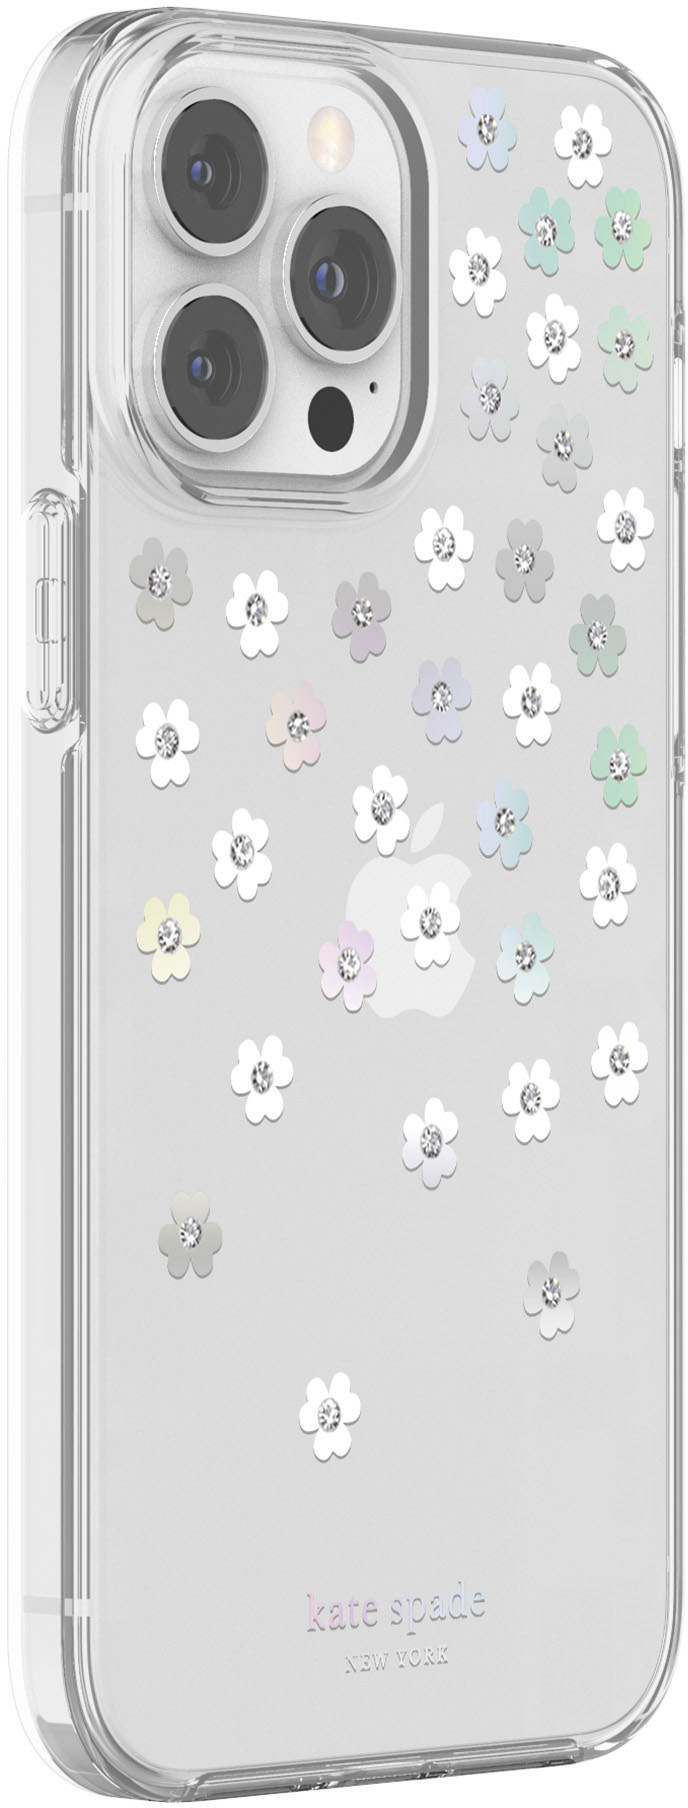 Left View: kate spade new york - Protective Hardshell Case for iPhone 13/12 Pro Max - Scatterred Flowers